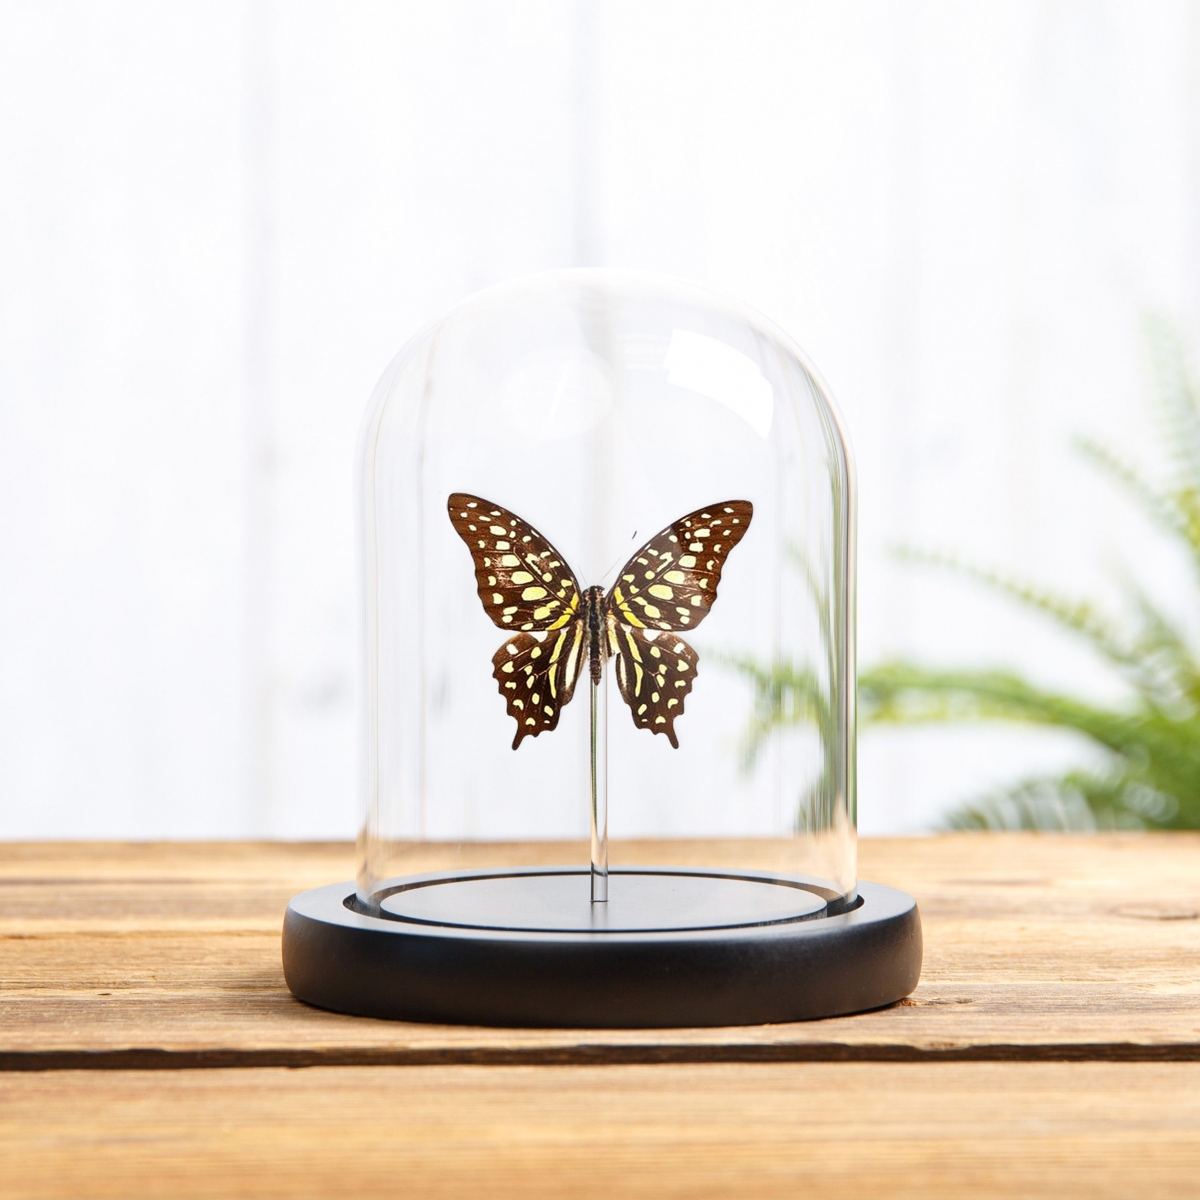 Minibeast Tailed Jay Swallowtail in Glass Dome with Wooden Base (Graphium agamemnon)